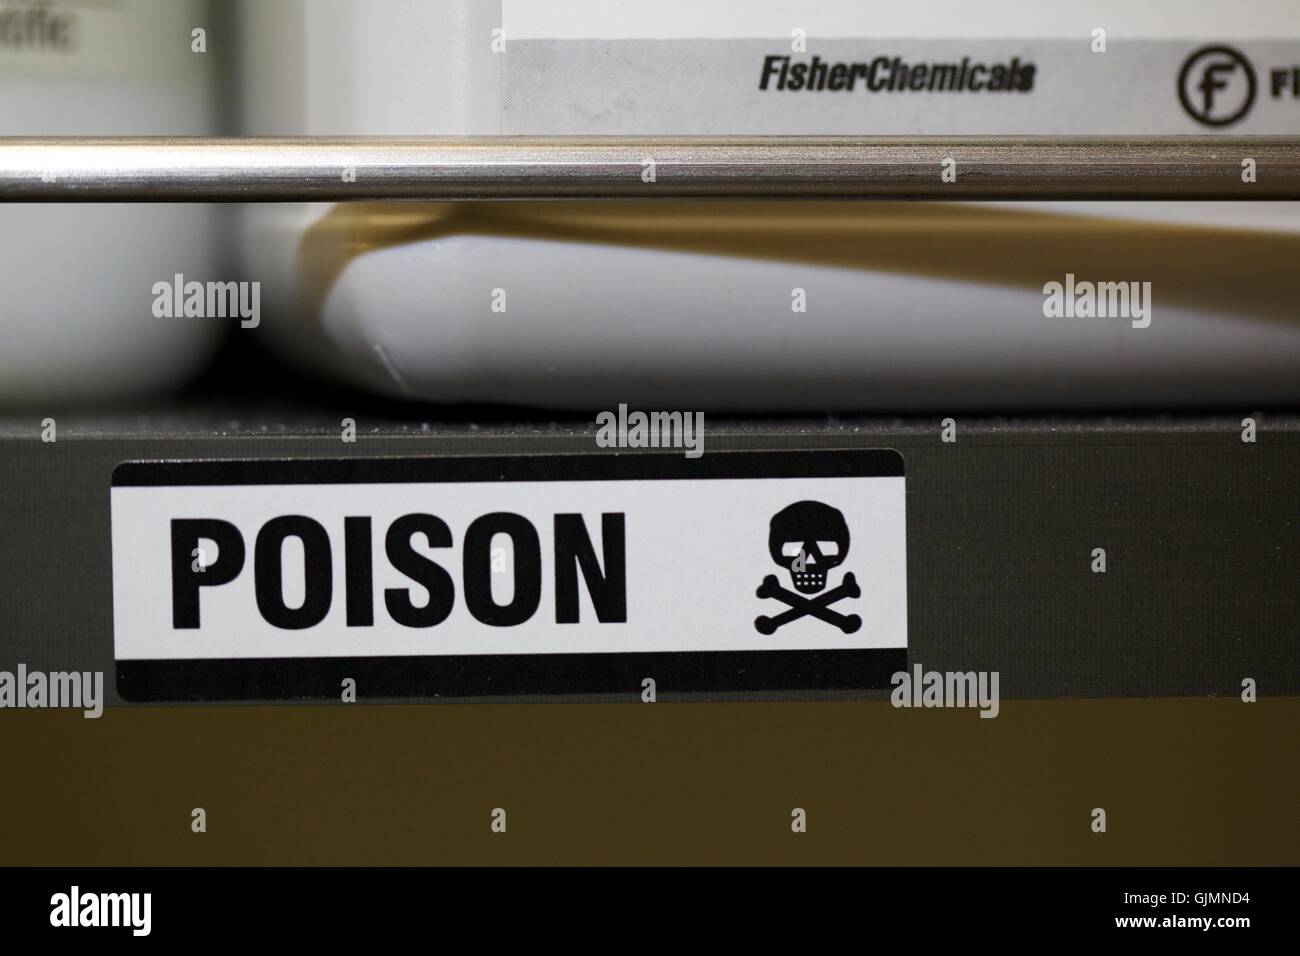 Poison label on chemical shelf in laboratory Stock Photo